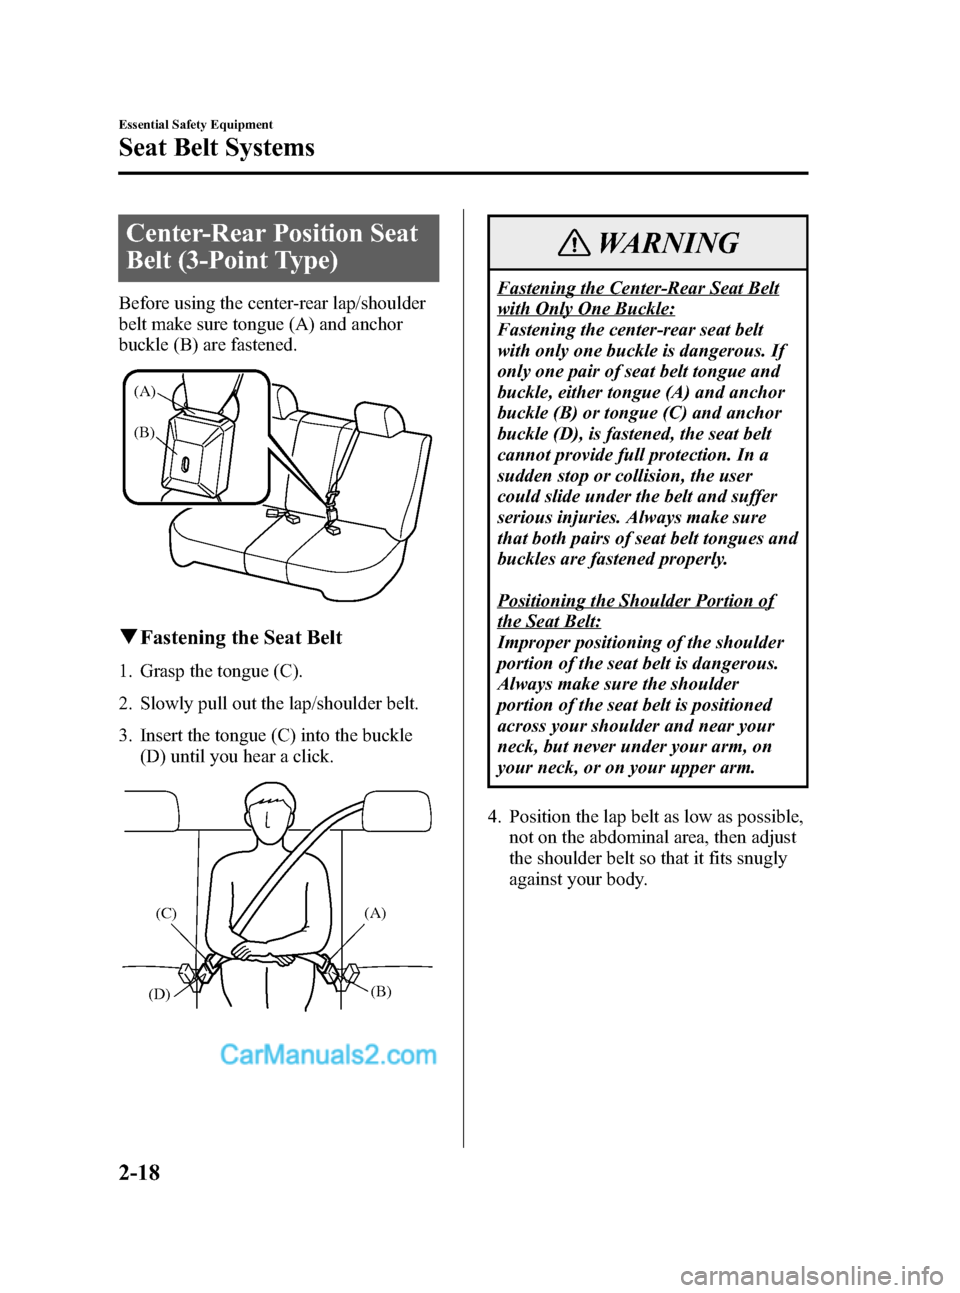 MAZDA MODEL MAZDASPEED 3 2007   (in English) Owners Guide Black plate (32,1)
Center-Rear Position Seat
Belt (3-Point Type)
Before using the center-rear lap/shoulder
belt make sure tongue (A) and anchor
buckle (B) are fastened.
(A)
(B)
qFastening the Seat Bel